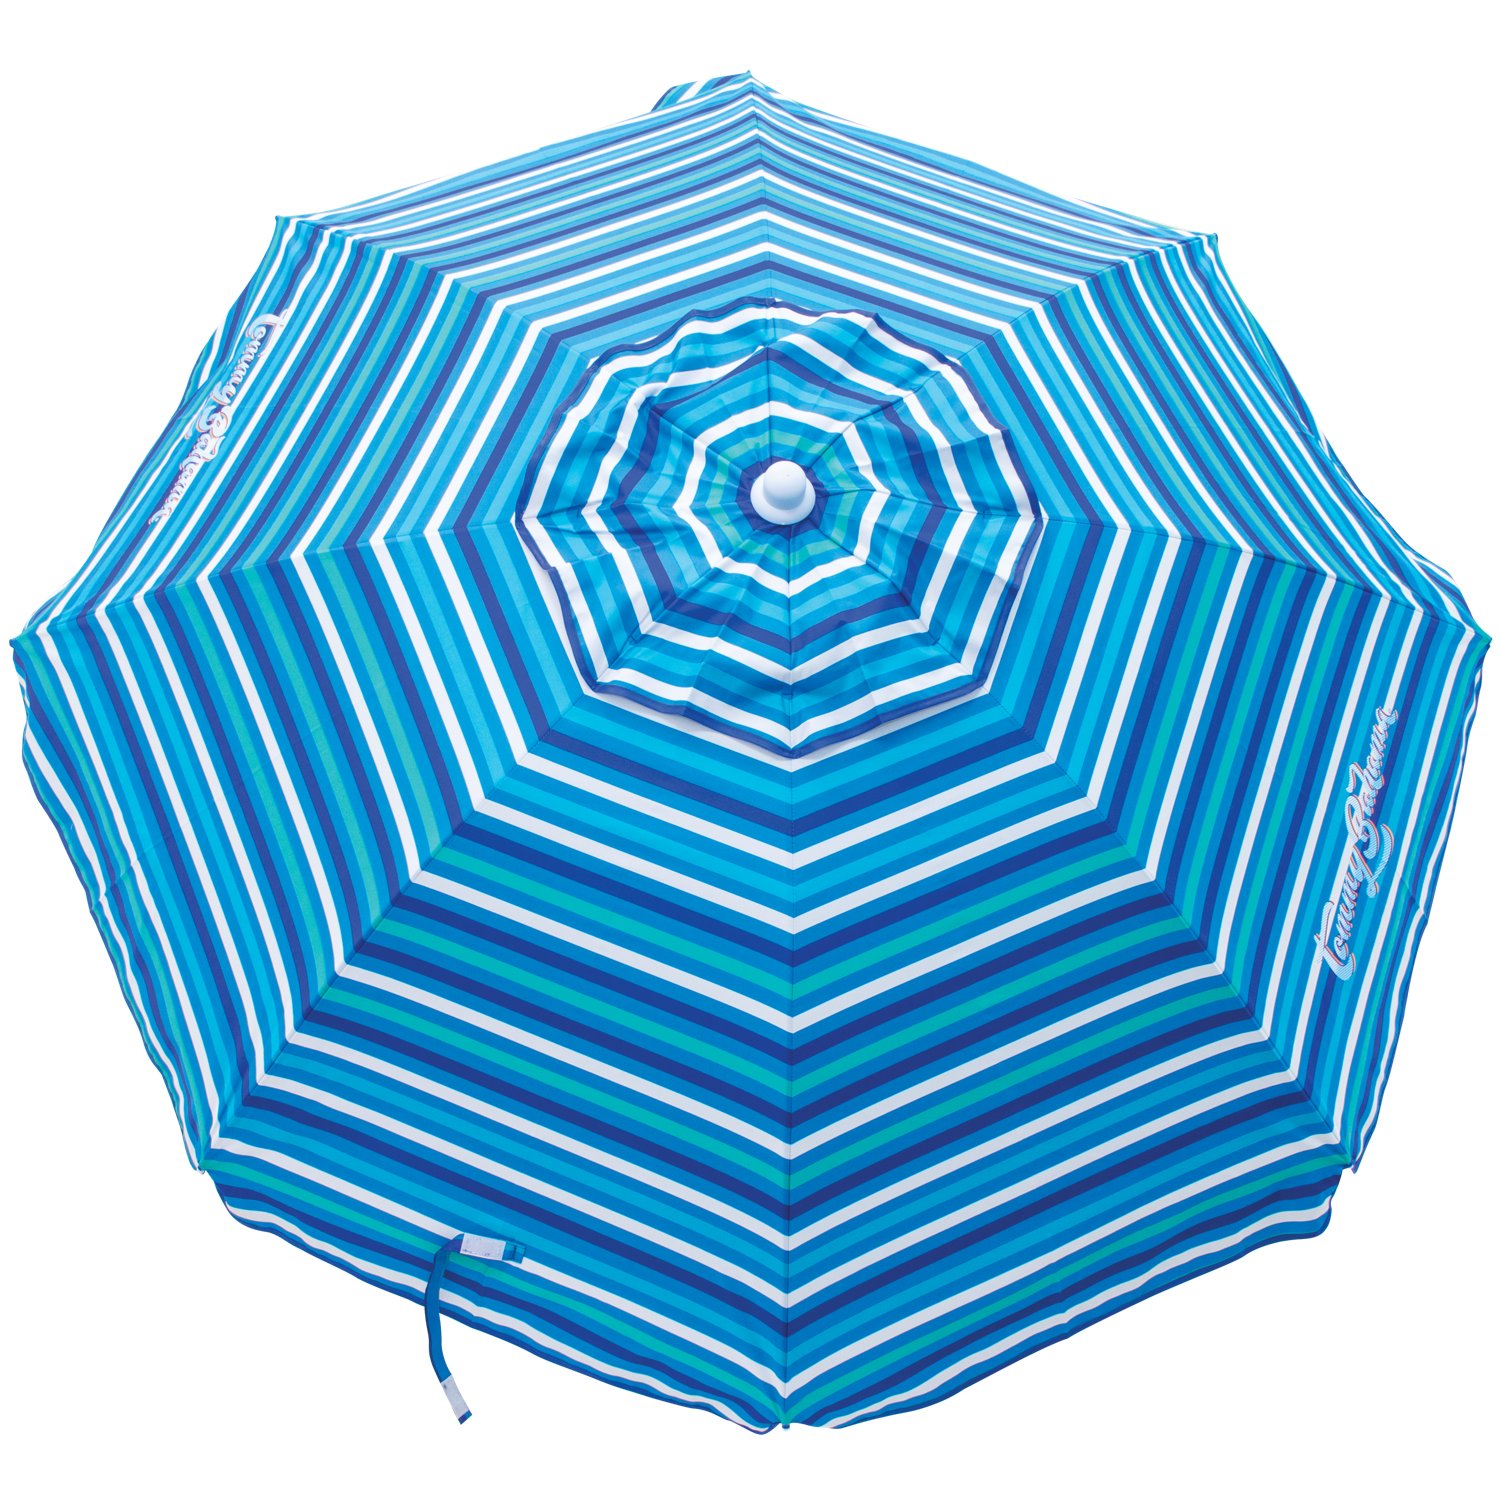 https://academy.scene7.com/is/image/academy//patio-furniture/tommy-bahama-6-ft-umbrella-with-wind-vent-uds79tb-799lwpdq9-blue/bac88e99459640e184e7d79604dba651?$pdp-gallery-ng$